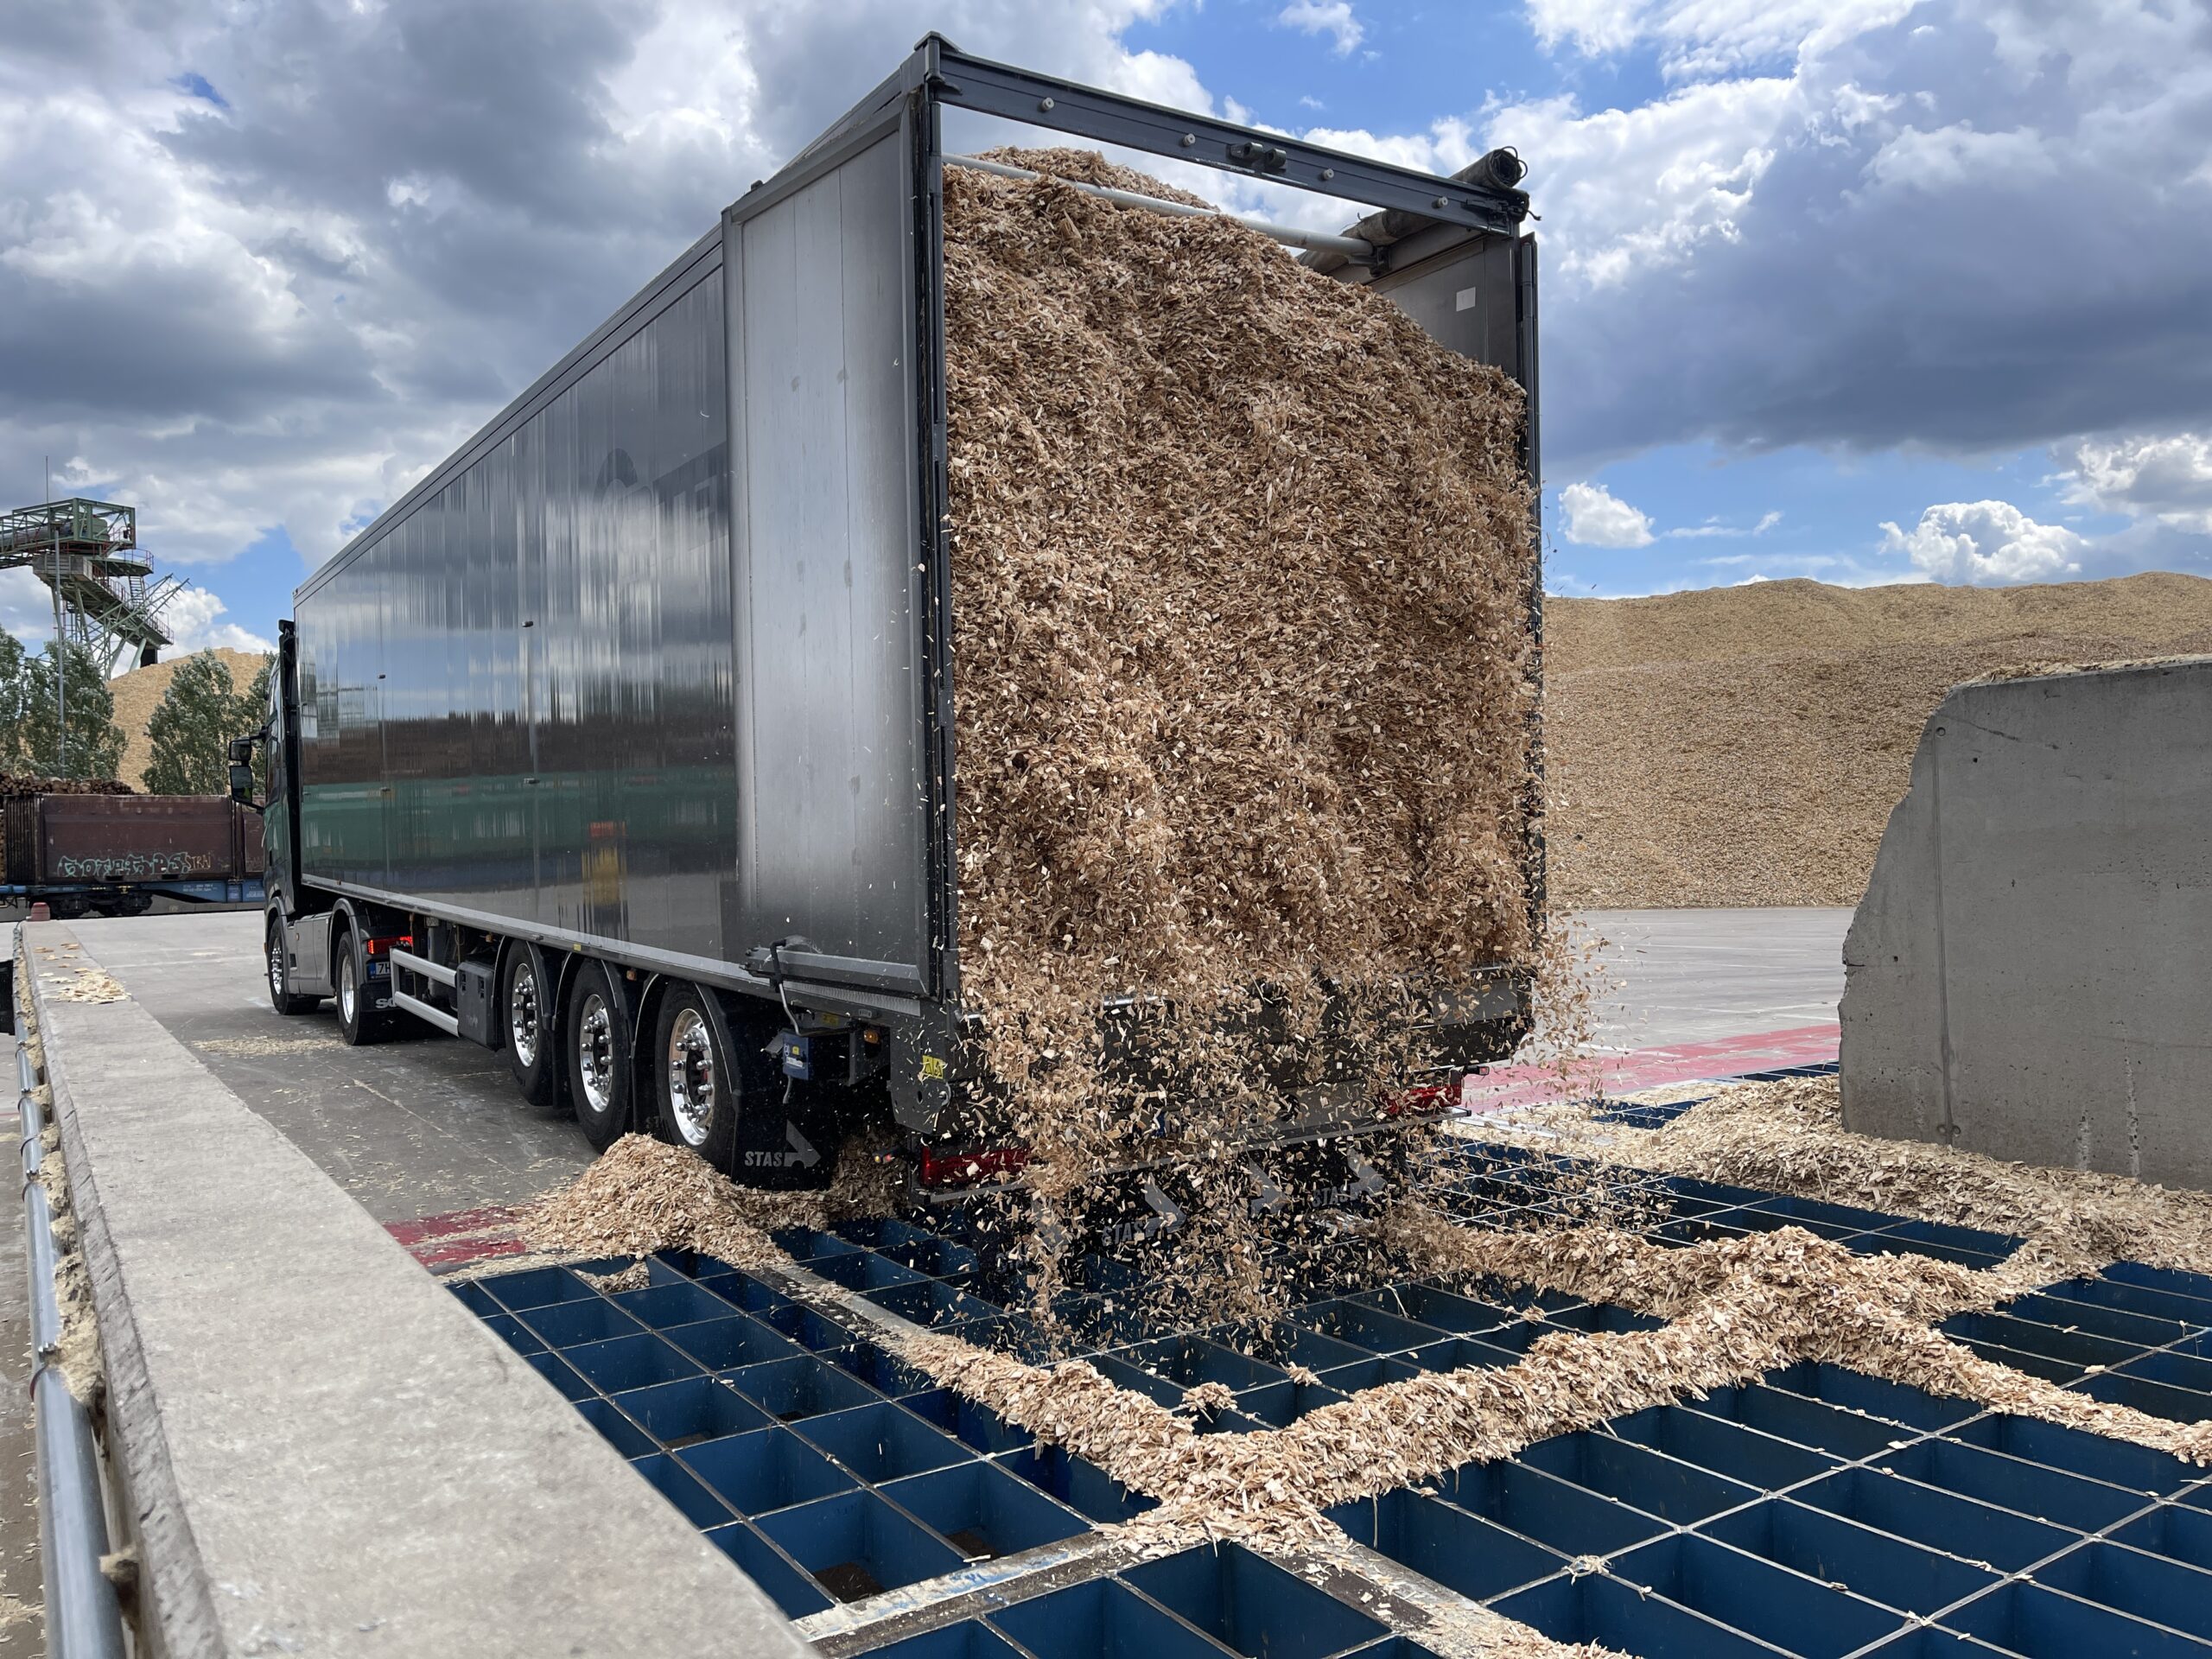 Receiving wood chips via truck on a chain receiver